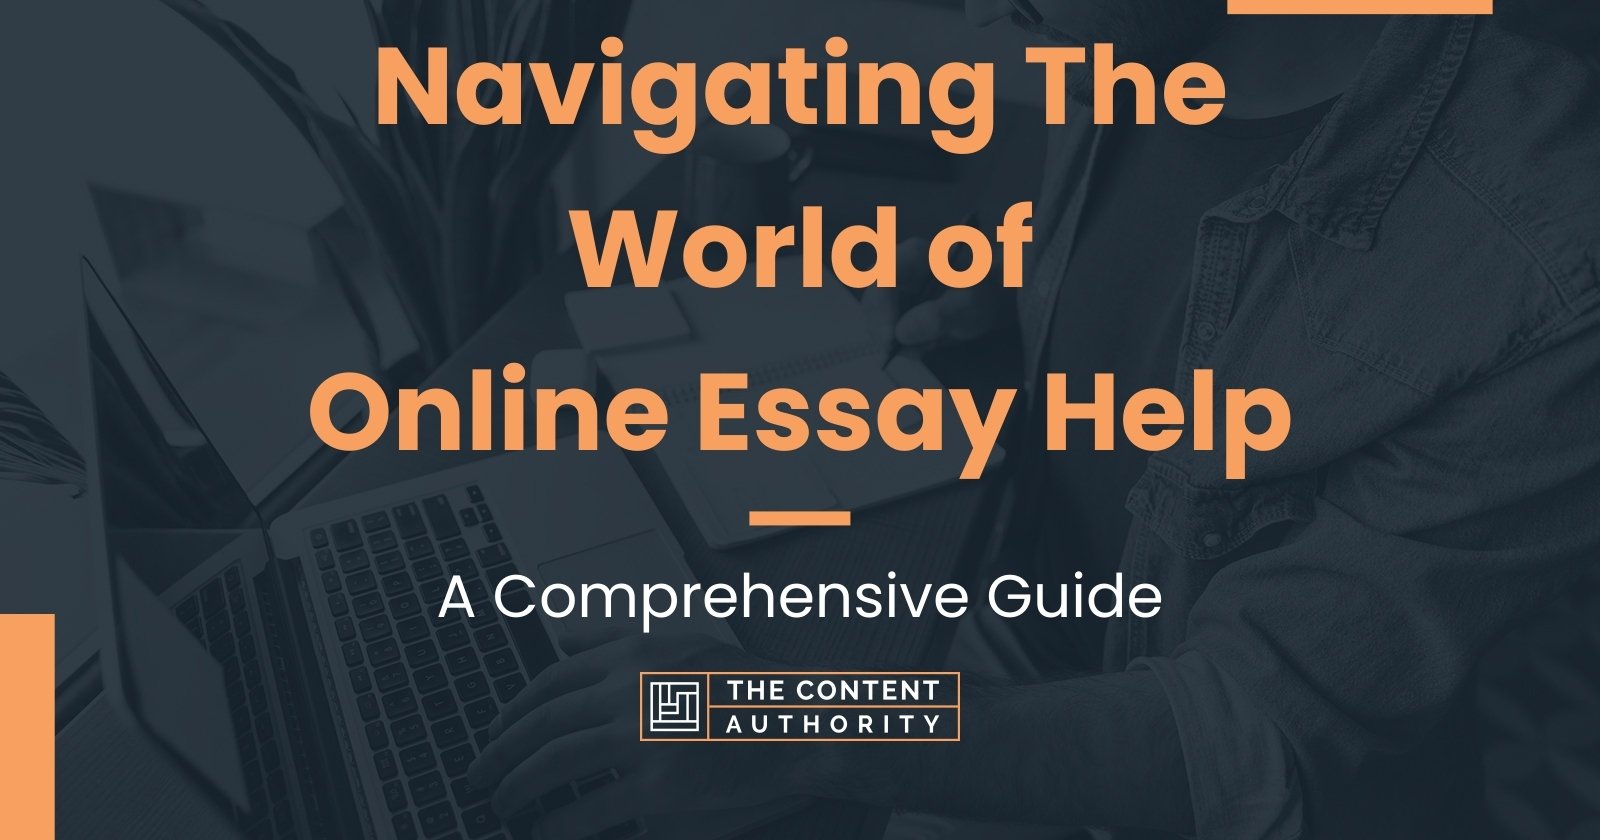 Navigating the World of Online Essay Help: A Comprehensive Guide